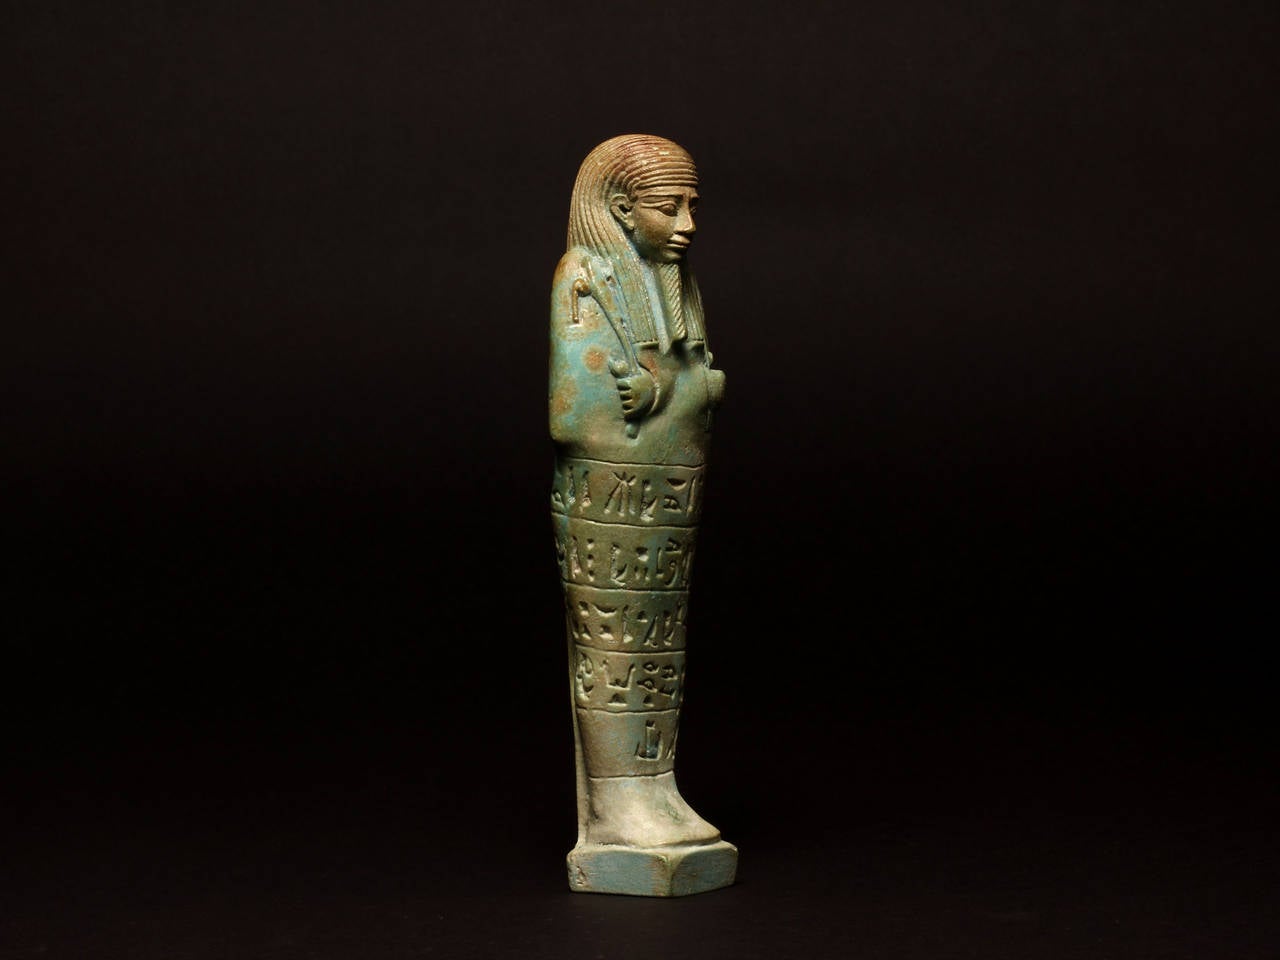 Greenish-blue glazed faience shabti for Horinebesh, standing on an integral raised plinth, decorated with a striated lappet wig and braided beard, the sleeved arms with emerging hands crossed over the chest to hold the pick and hoe, and a parallel